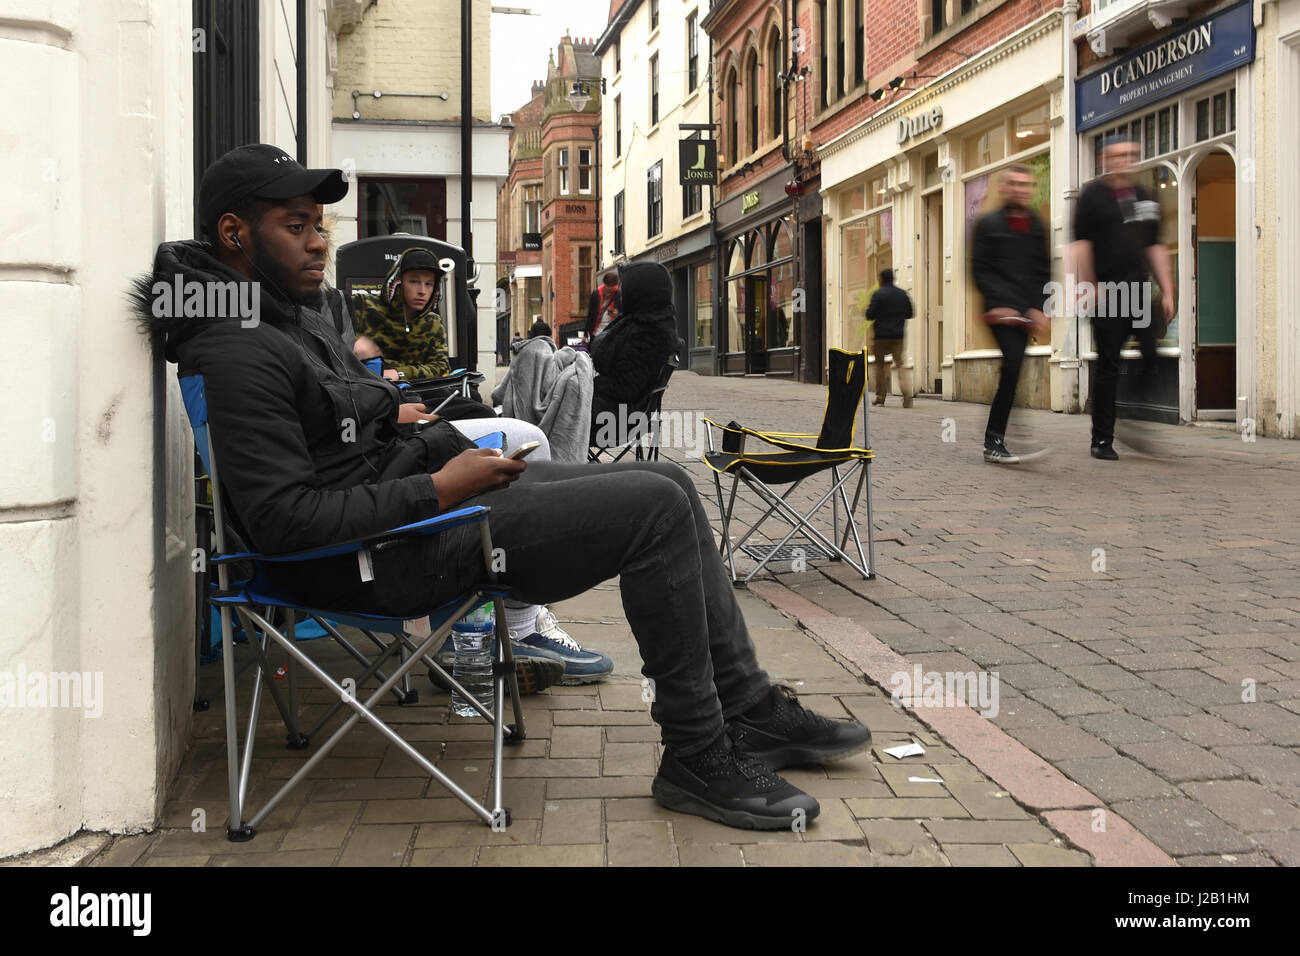 Fans camp outside fashion retailer 18montrose in Nottingham for the Adidas  Yeezy Boost 350 V2 trainers, the latest footwear to be released by American  rap star Kanye West and Adidas, which go